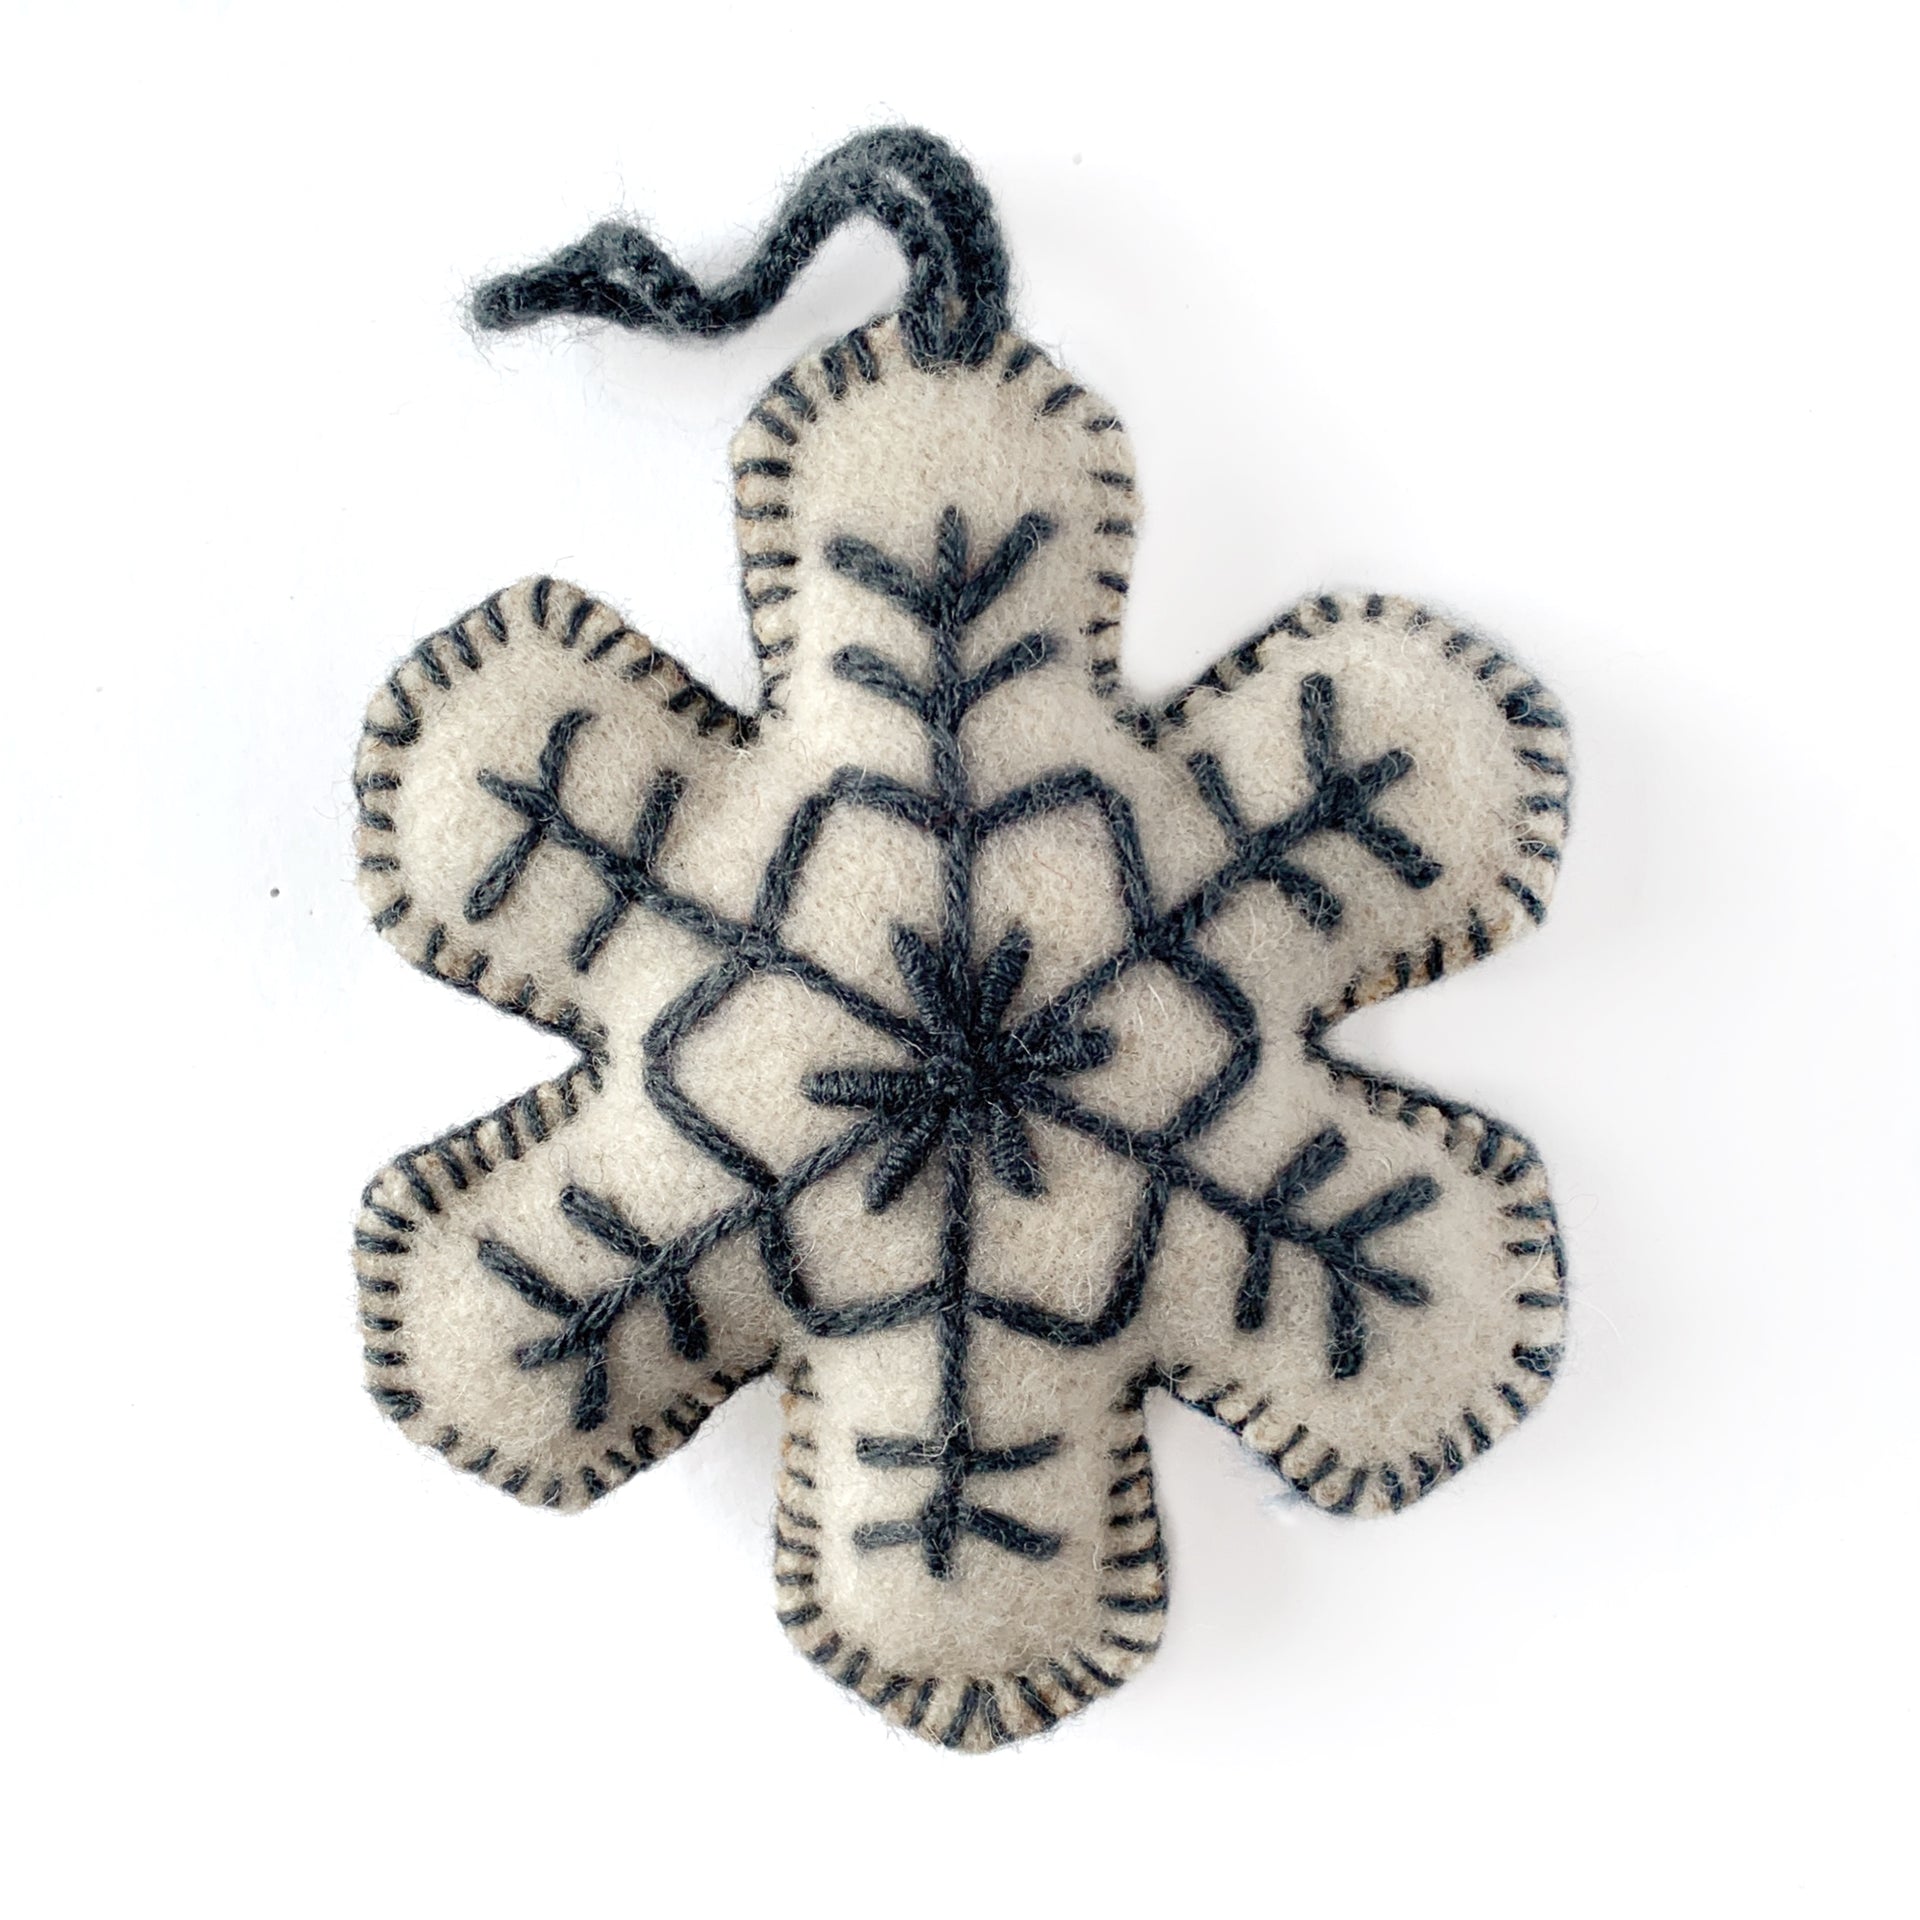 Snowflake Ornament, Solid Embroidered Wool